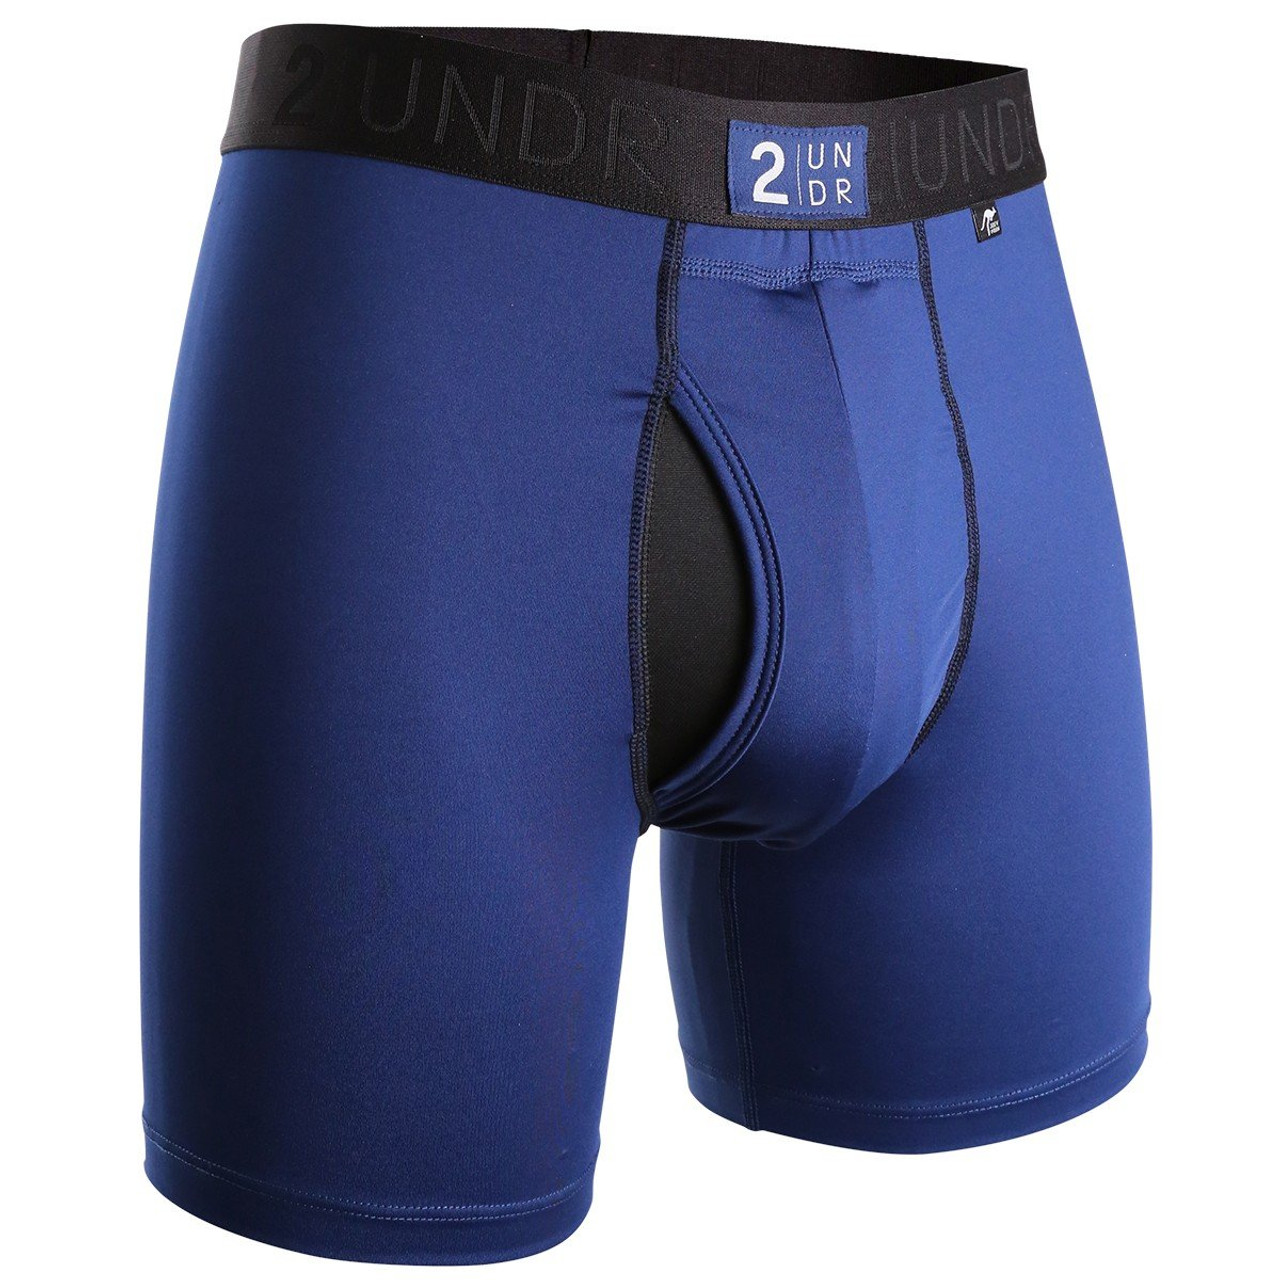 2UNDR Power Shift Mens Boxers with Joey Pouch (Patent Pending